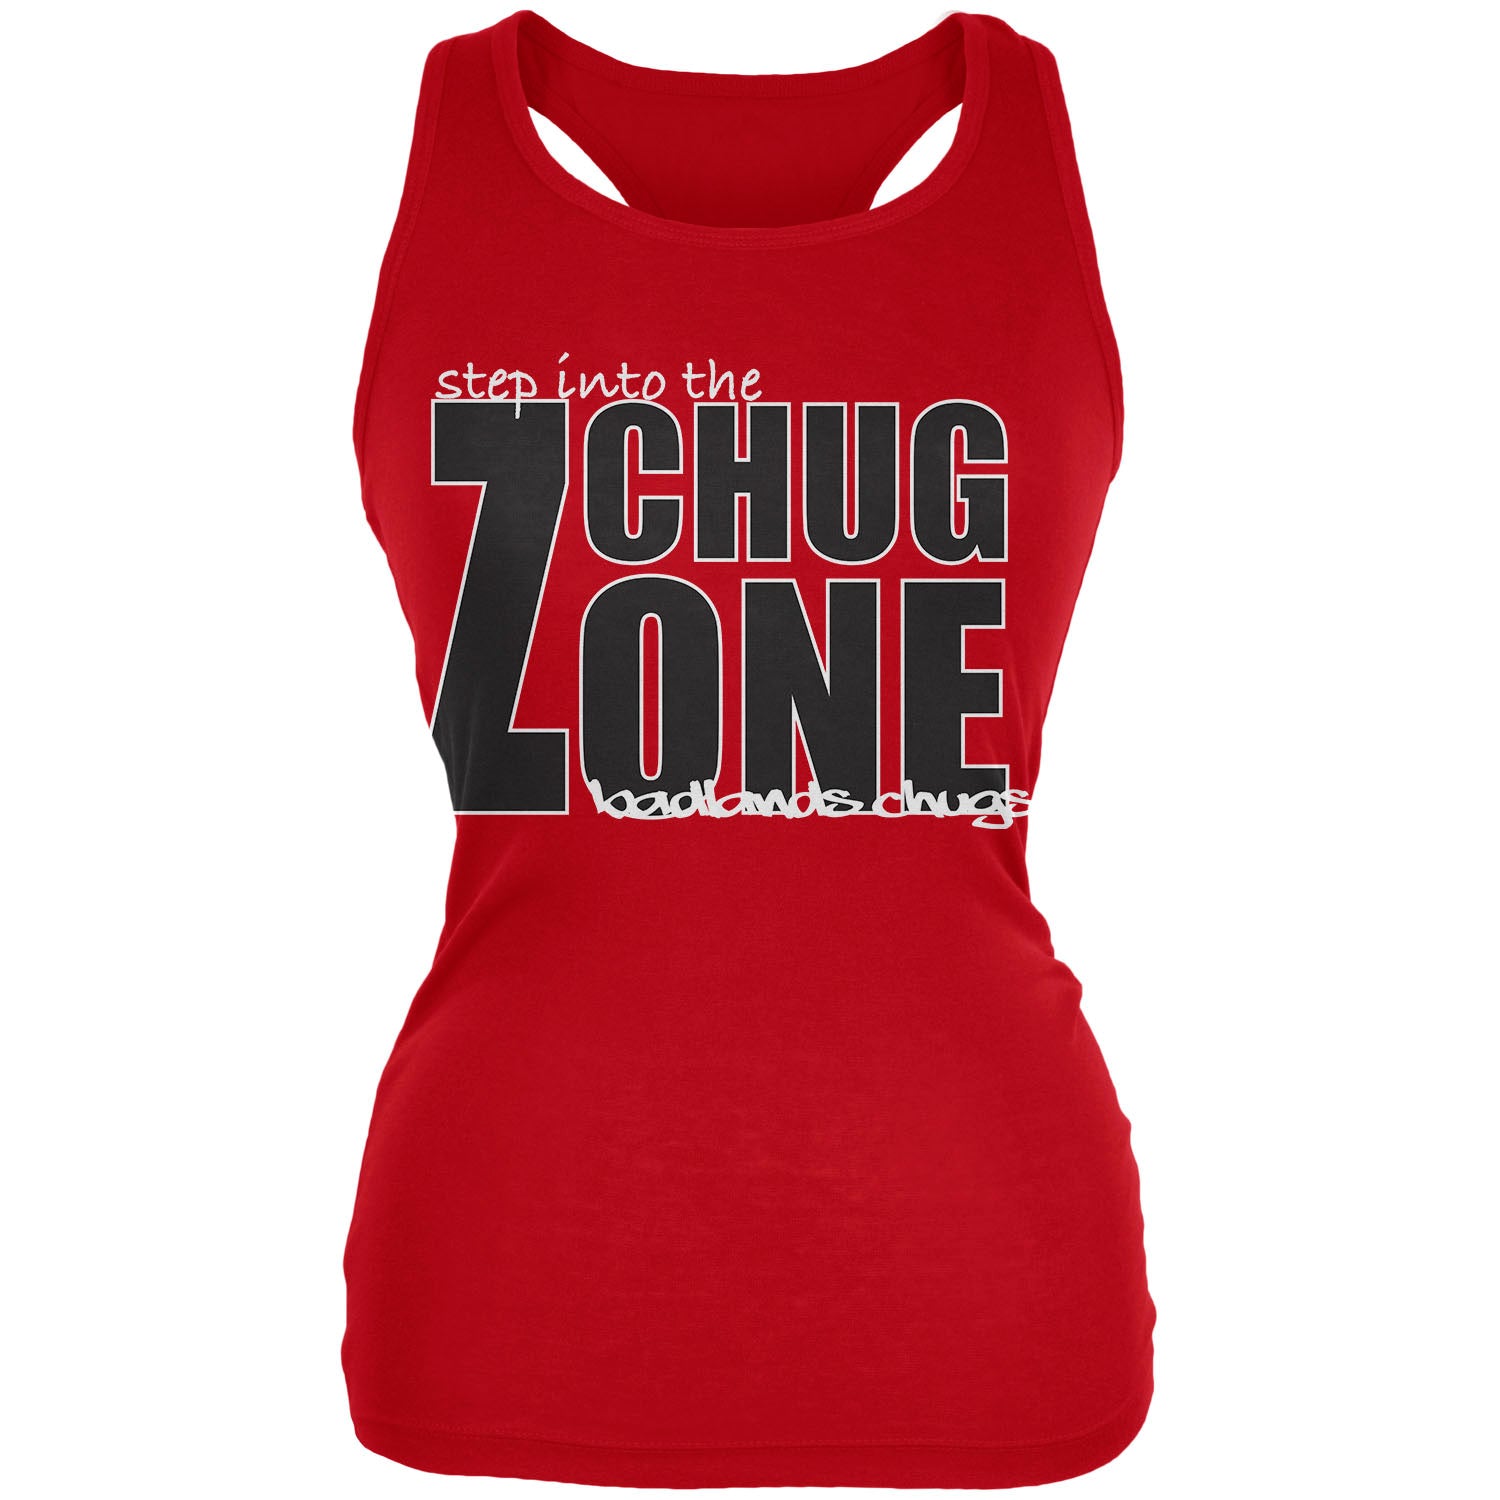  Step into the Chug Zone Bubble Junior's Tank Top